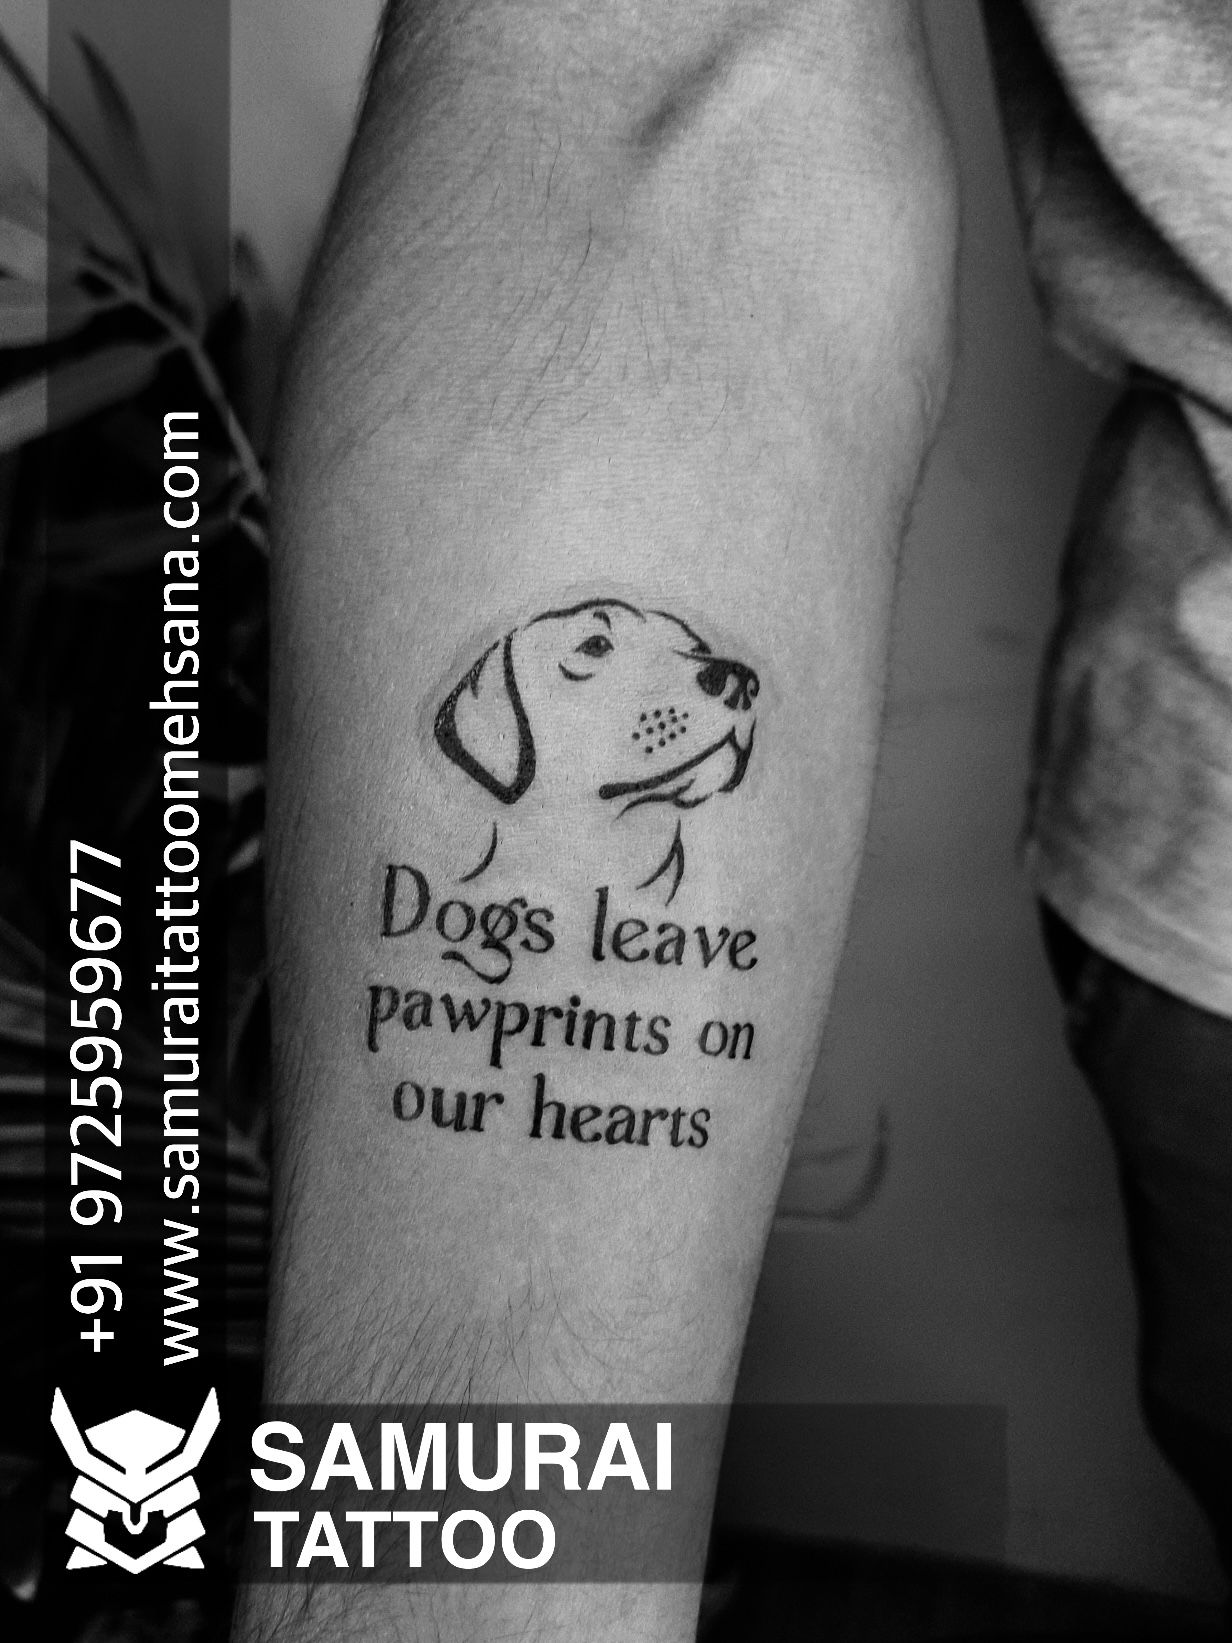 Immortal Tattoos  This amazing soul is a dog rescuer  wanted to get this quote  tattooed with dog paws  Designed  tattooed by manavdamir  immortaltattoos india chandigarh customtattooing customtattoo  tattoosinpunjab 